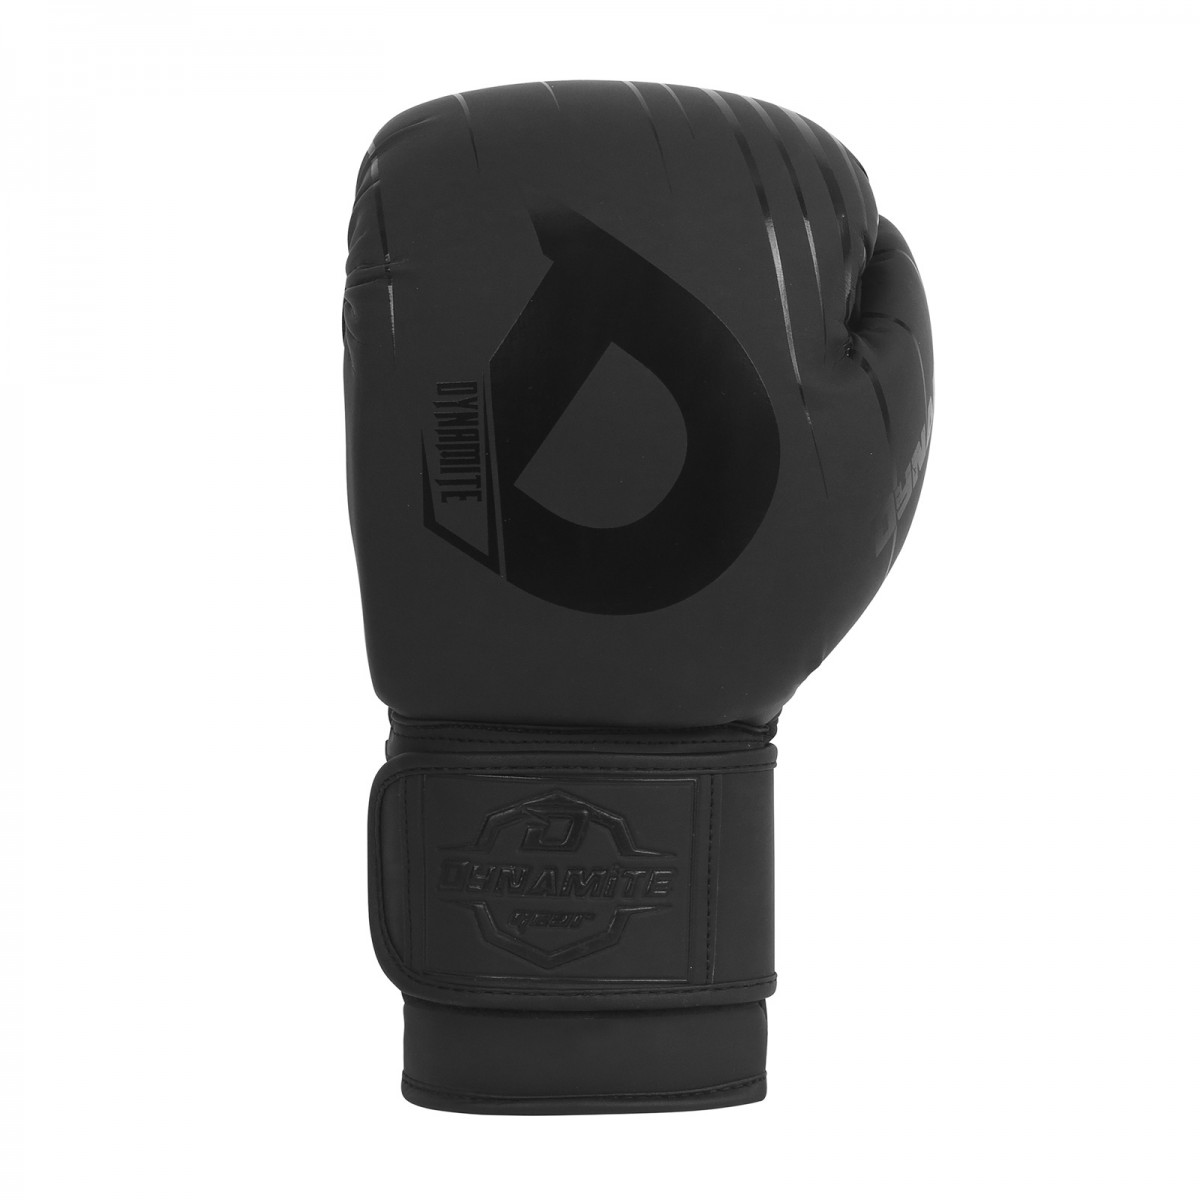 Dynamite Kickboxing Boxing Gloves - Synthetic Leather 14 OZ